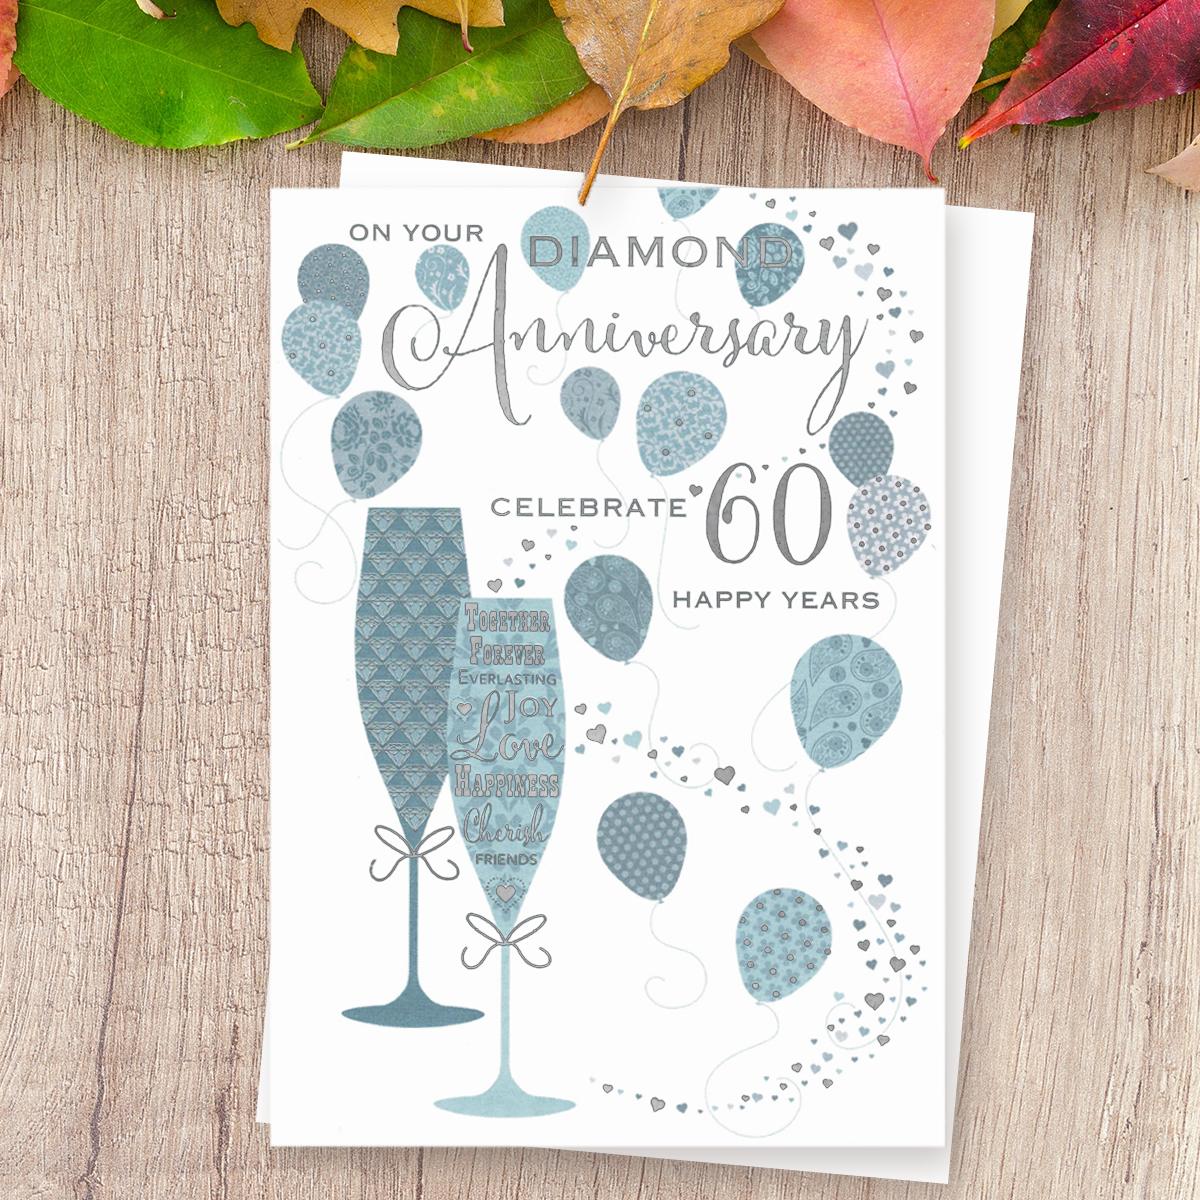 'On Your Diamond Anniversary Celebrate 60 Happy Years' Card Featuring Two Flutes With Balloons. With Beautiful Silver Foil Detail And White Envelope